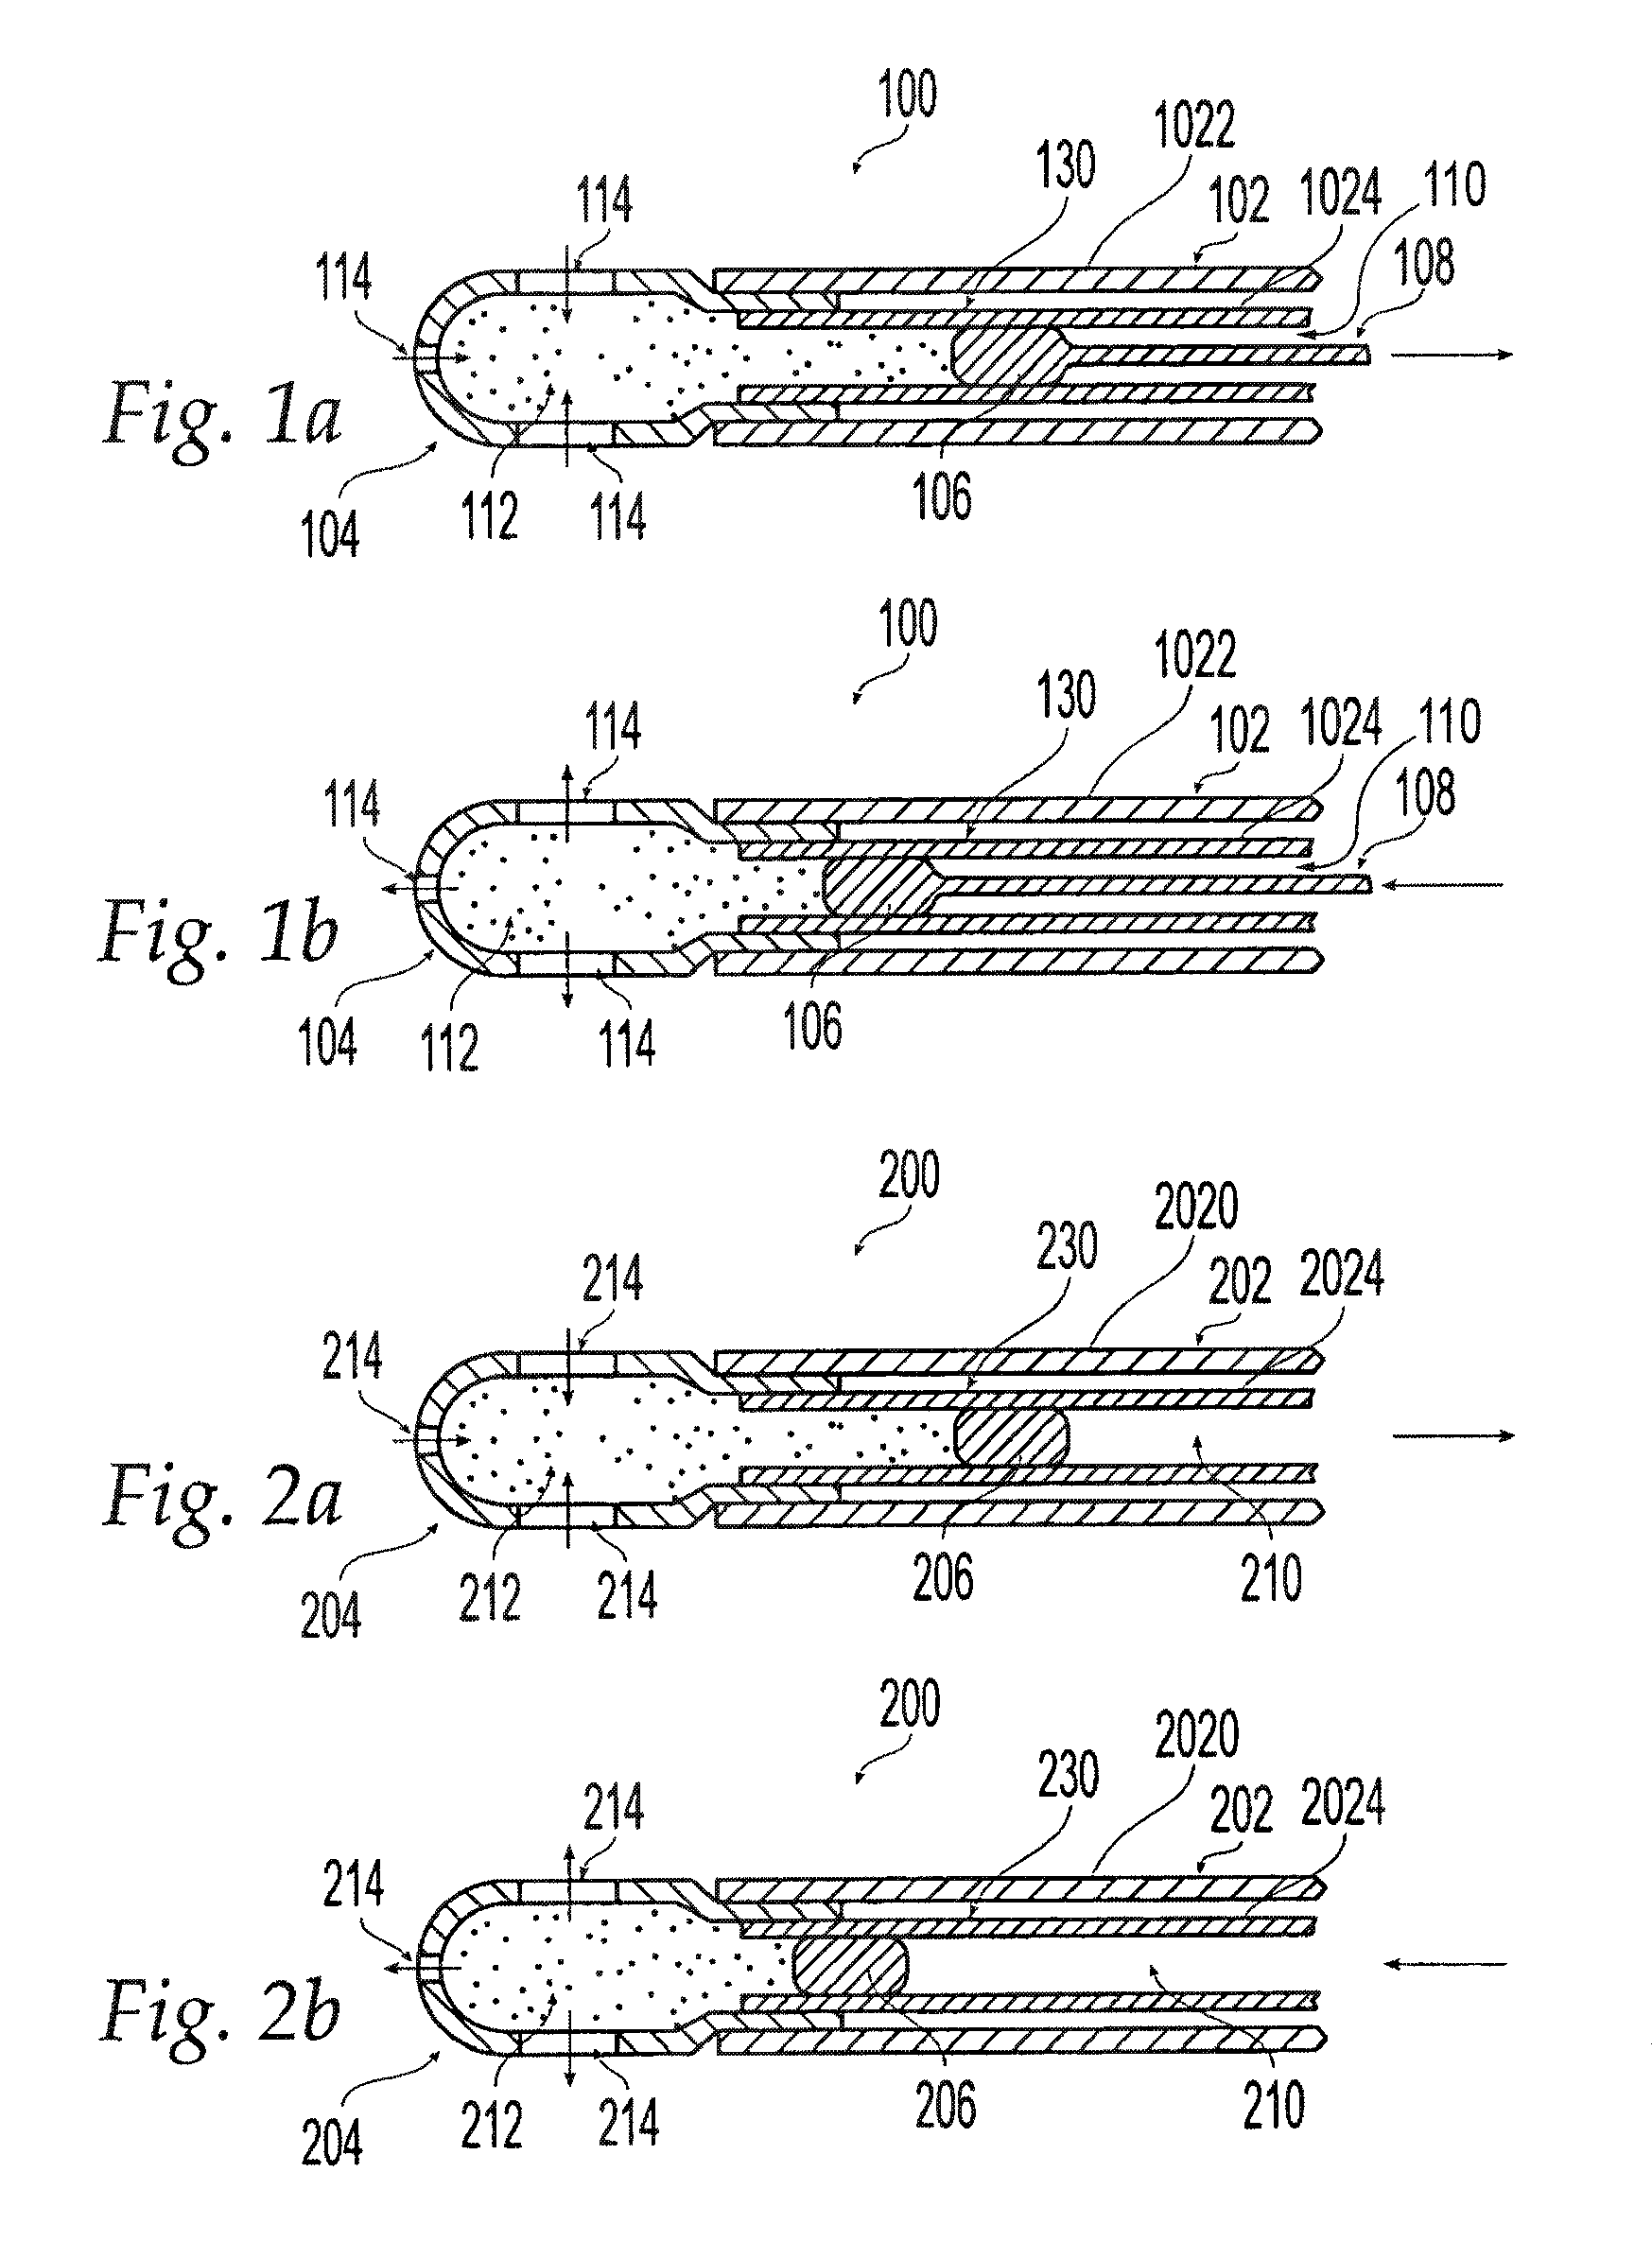 Cooled ablation catheter with reciprocating flow